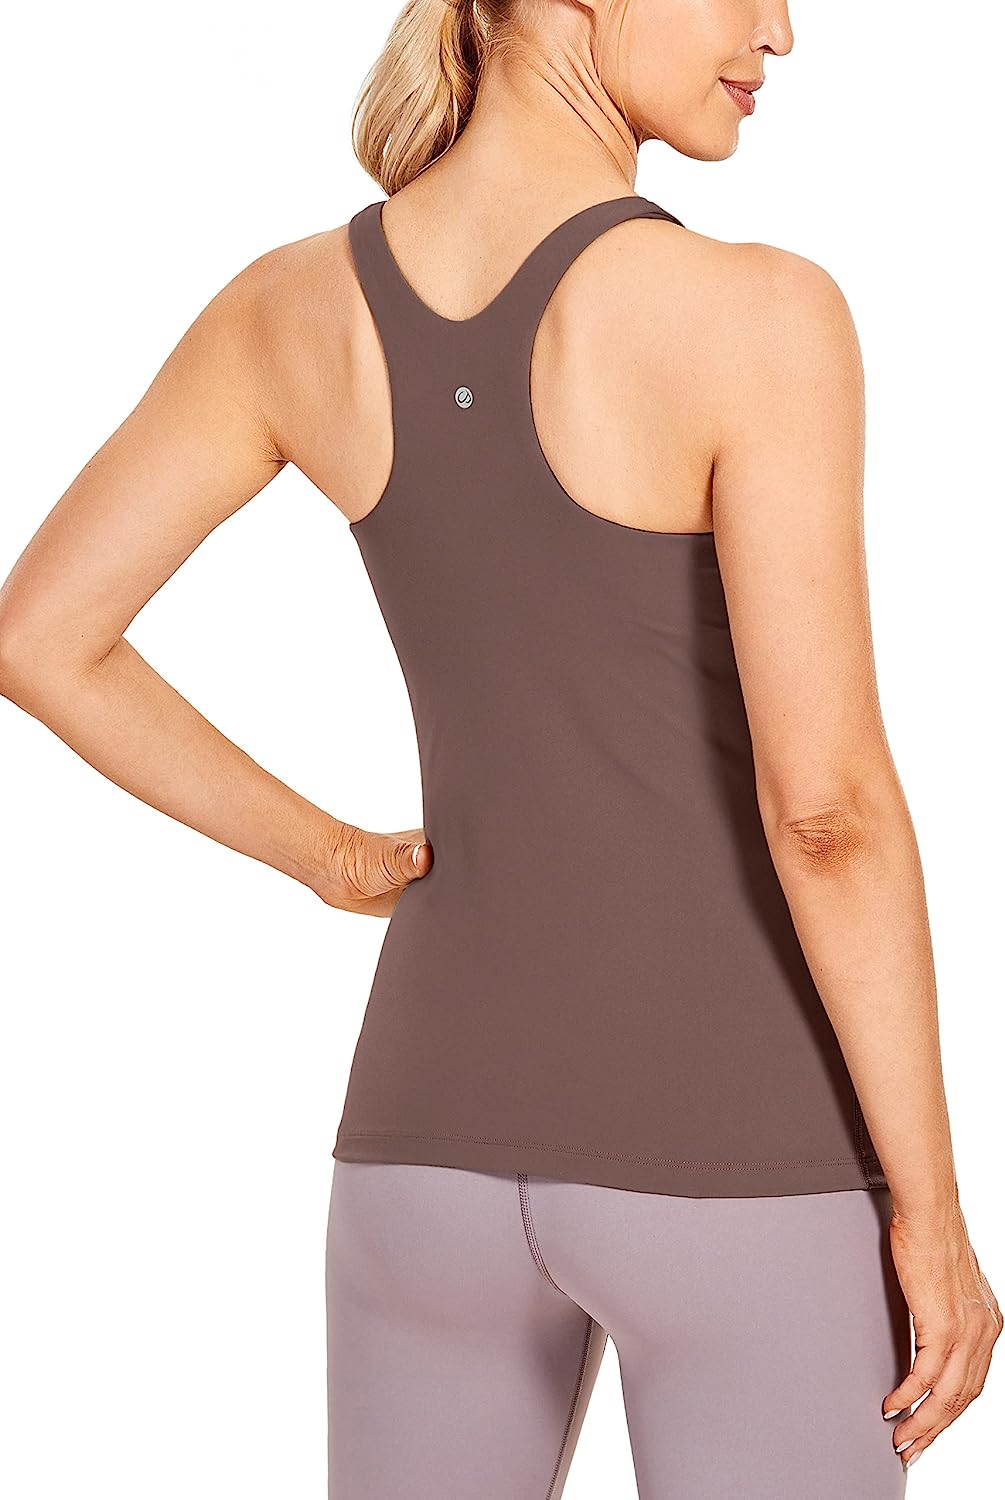 Stylish Workout Tank Tops with Built-in Bra for Women